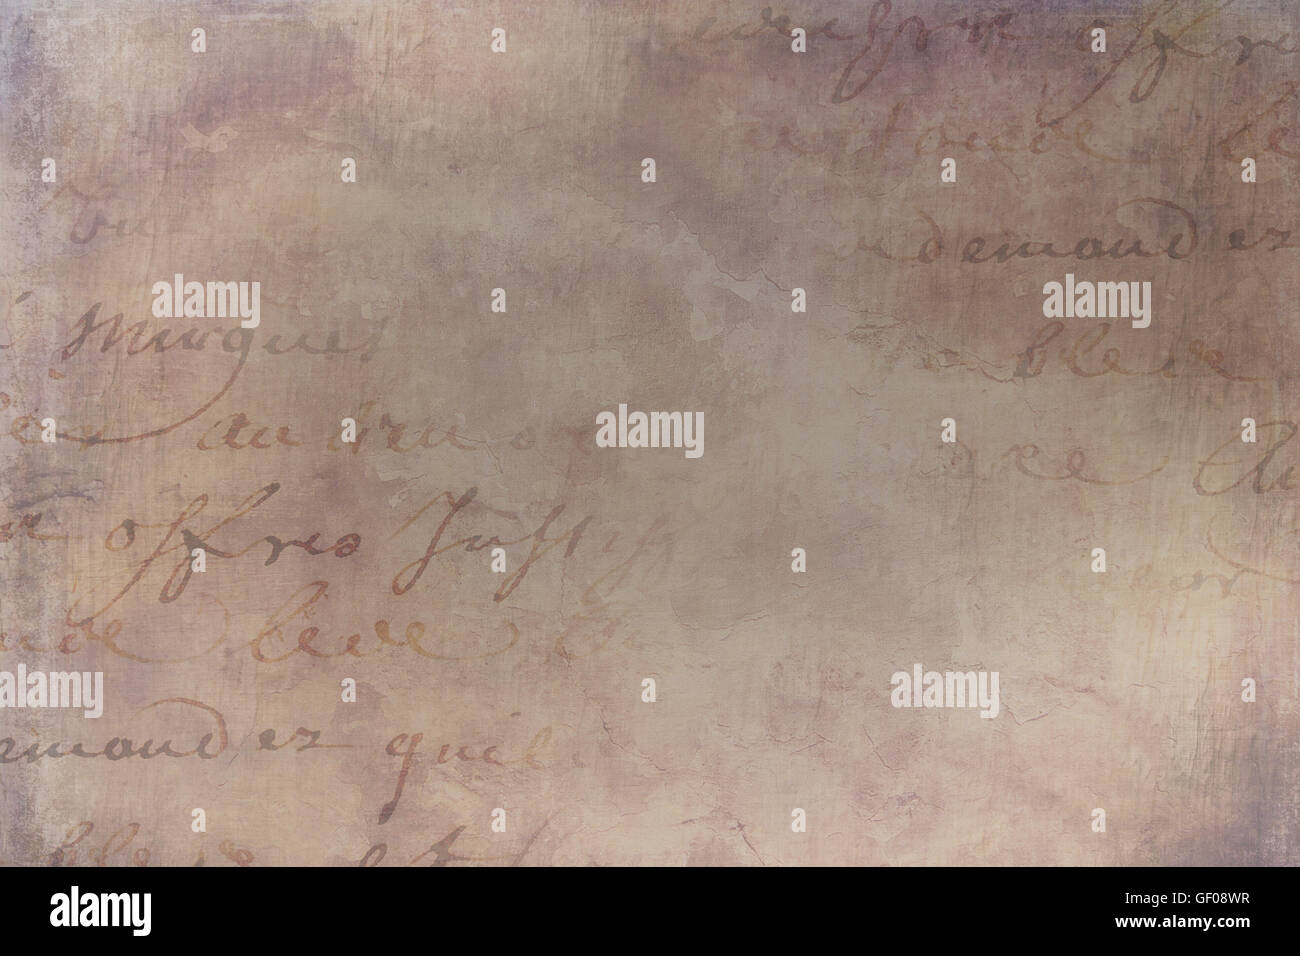 Background Collage of Textures Vintage Papers Paint and Antique Text Stock Photo